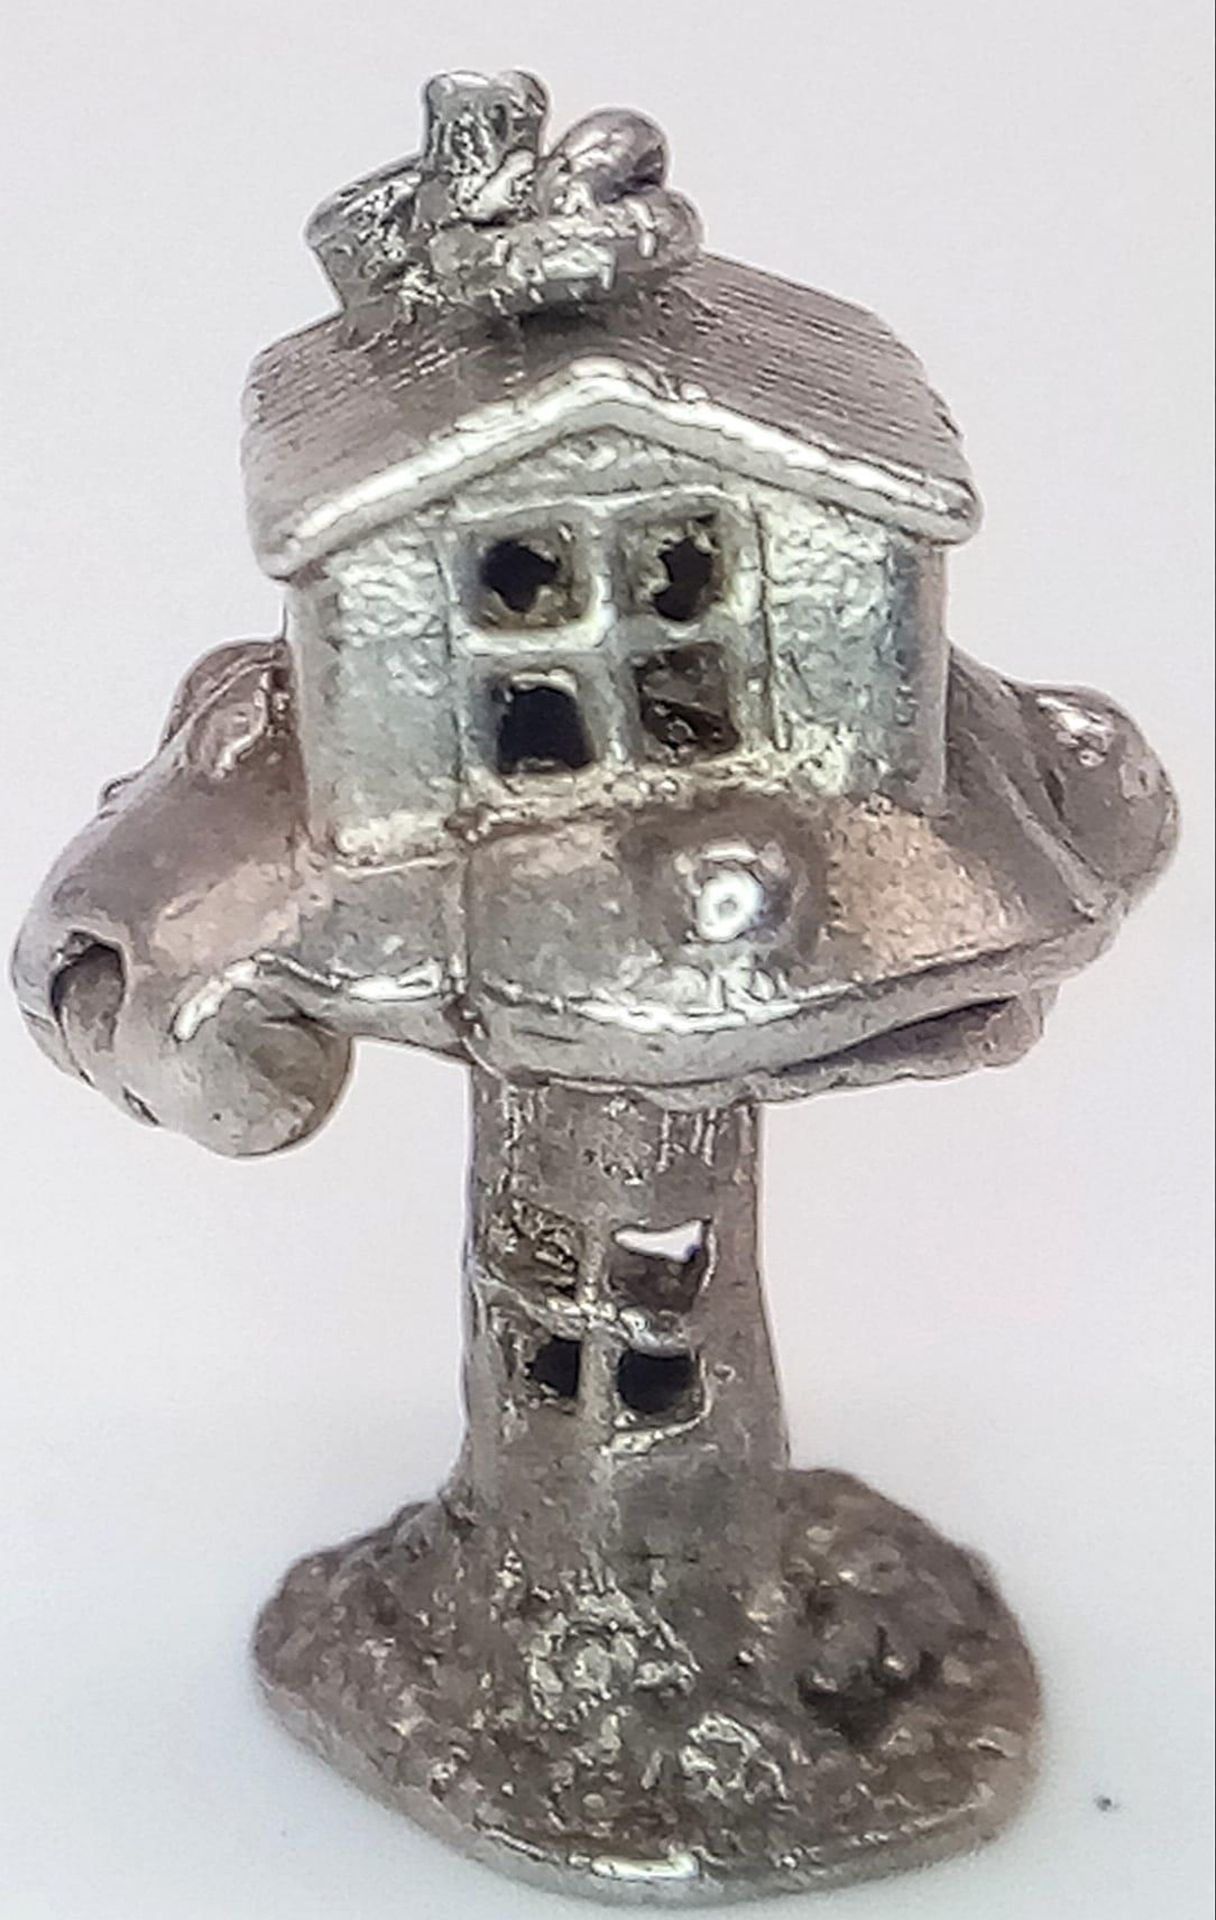 A VINTAGE STERLING SILVER TREE HOUSE CHARM, WHICH OPENS TO REVEAL A WIZARD INSIDE, WEIGHT 4G